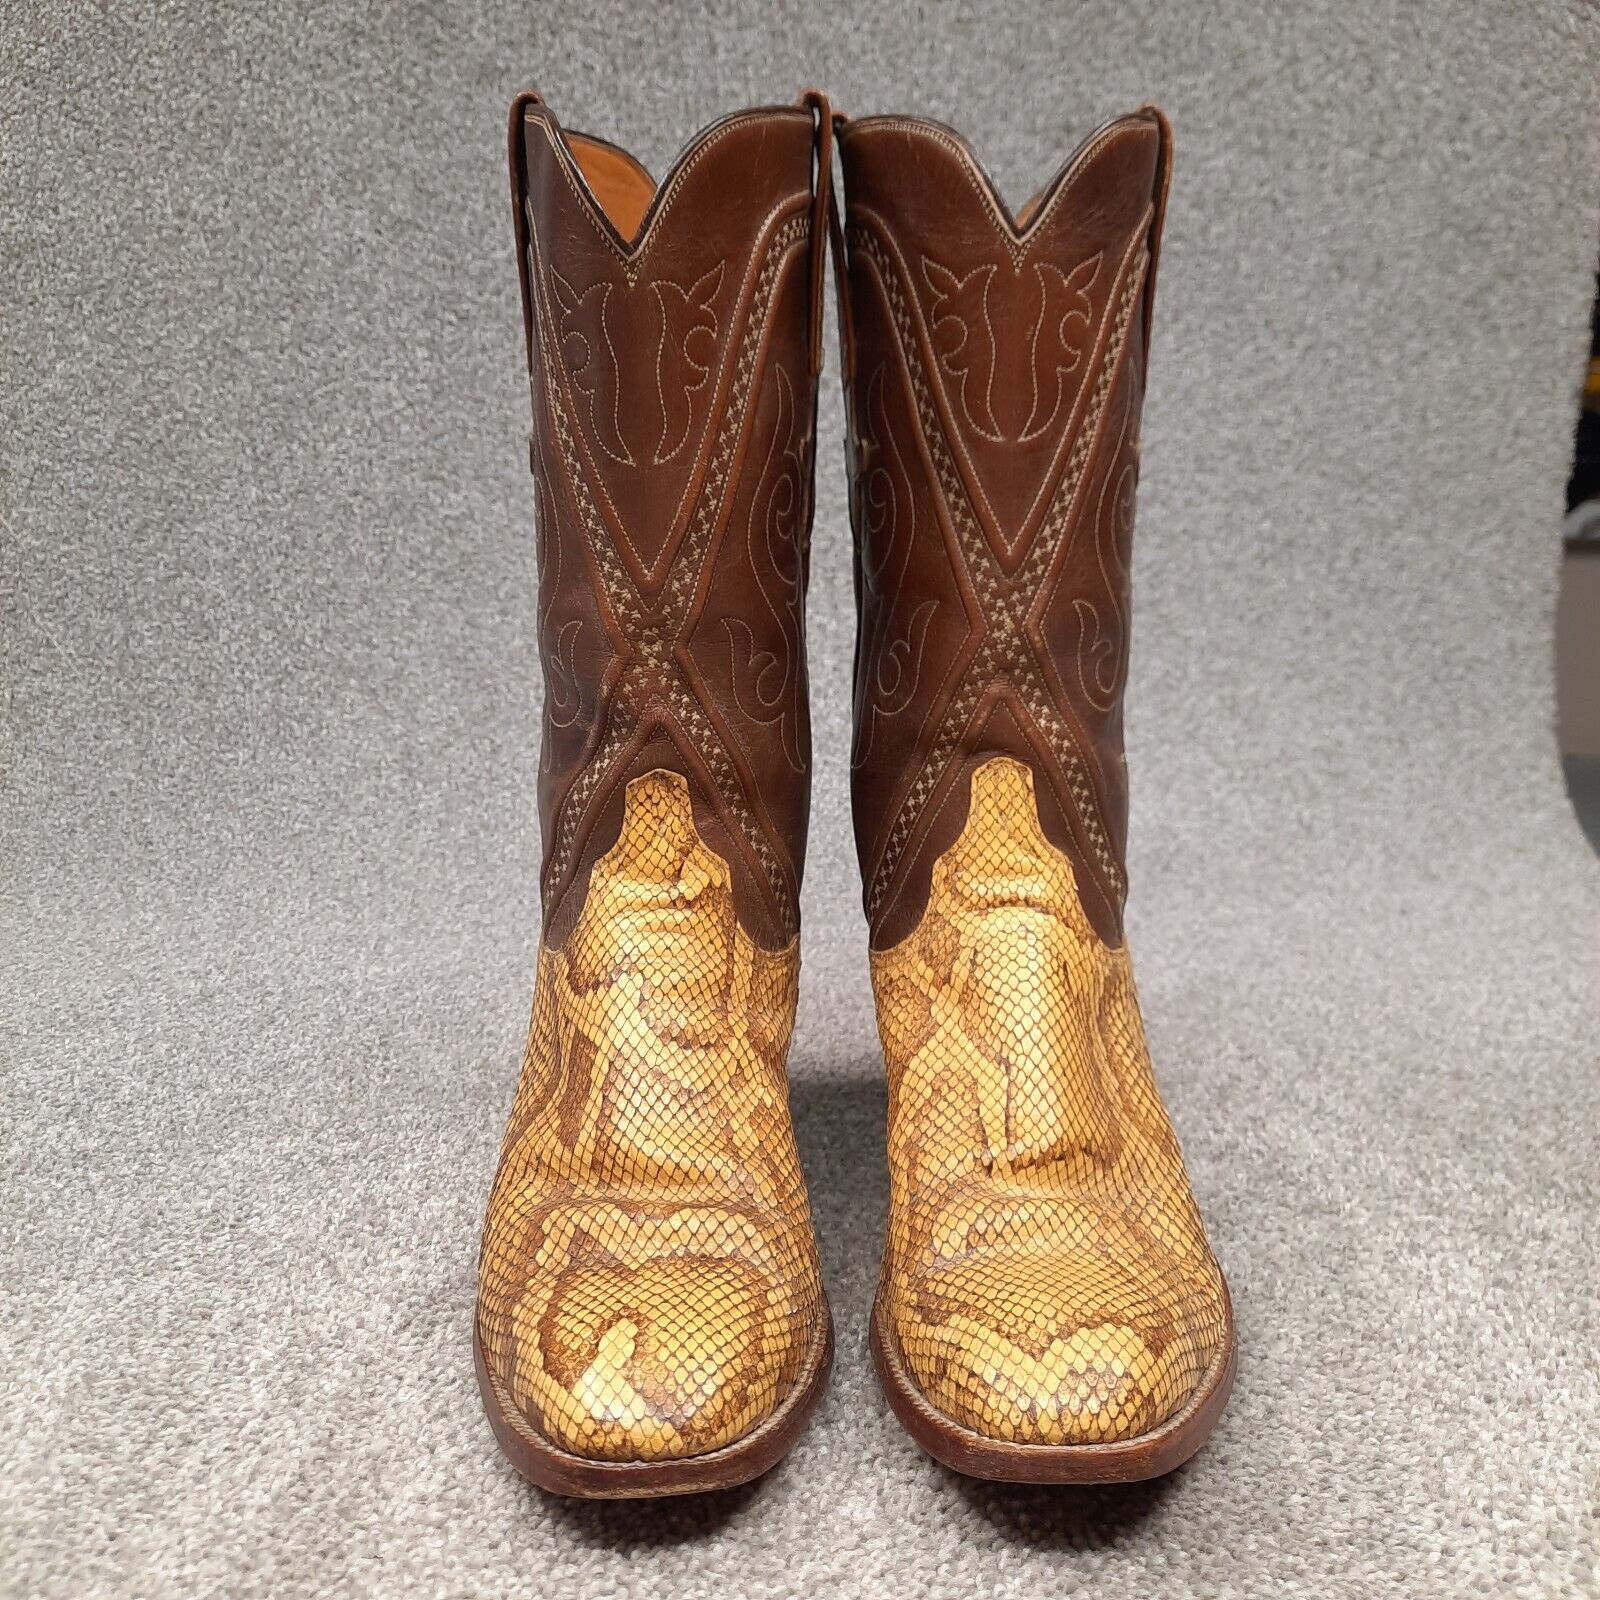 VINTAGE LUCCHESE MENS COWBOY BOOTS EXOTIC SNAKESK… - image 6